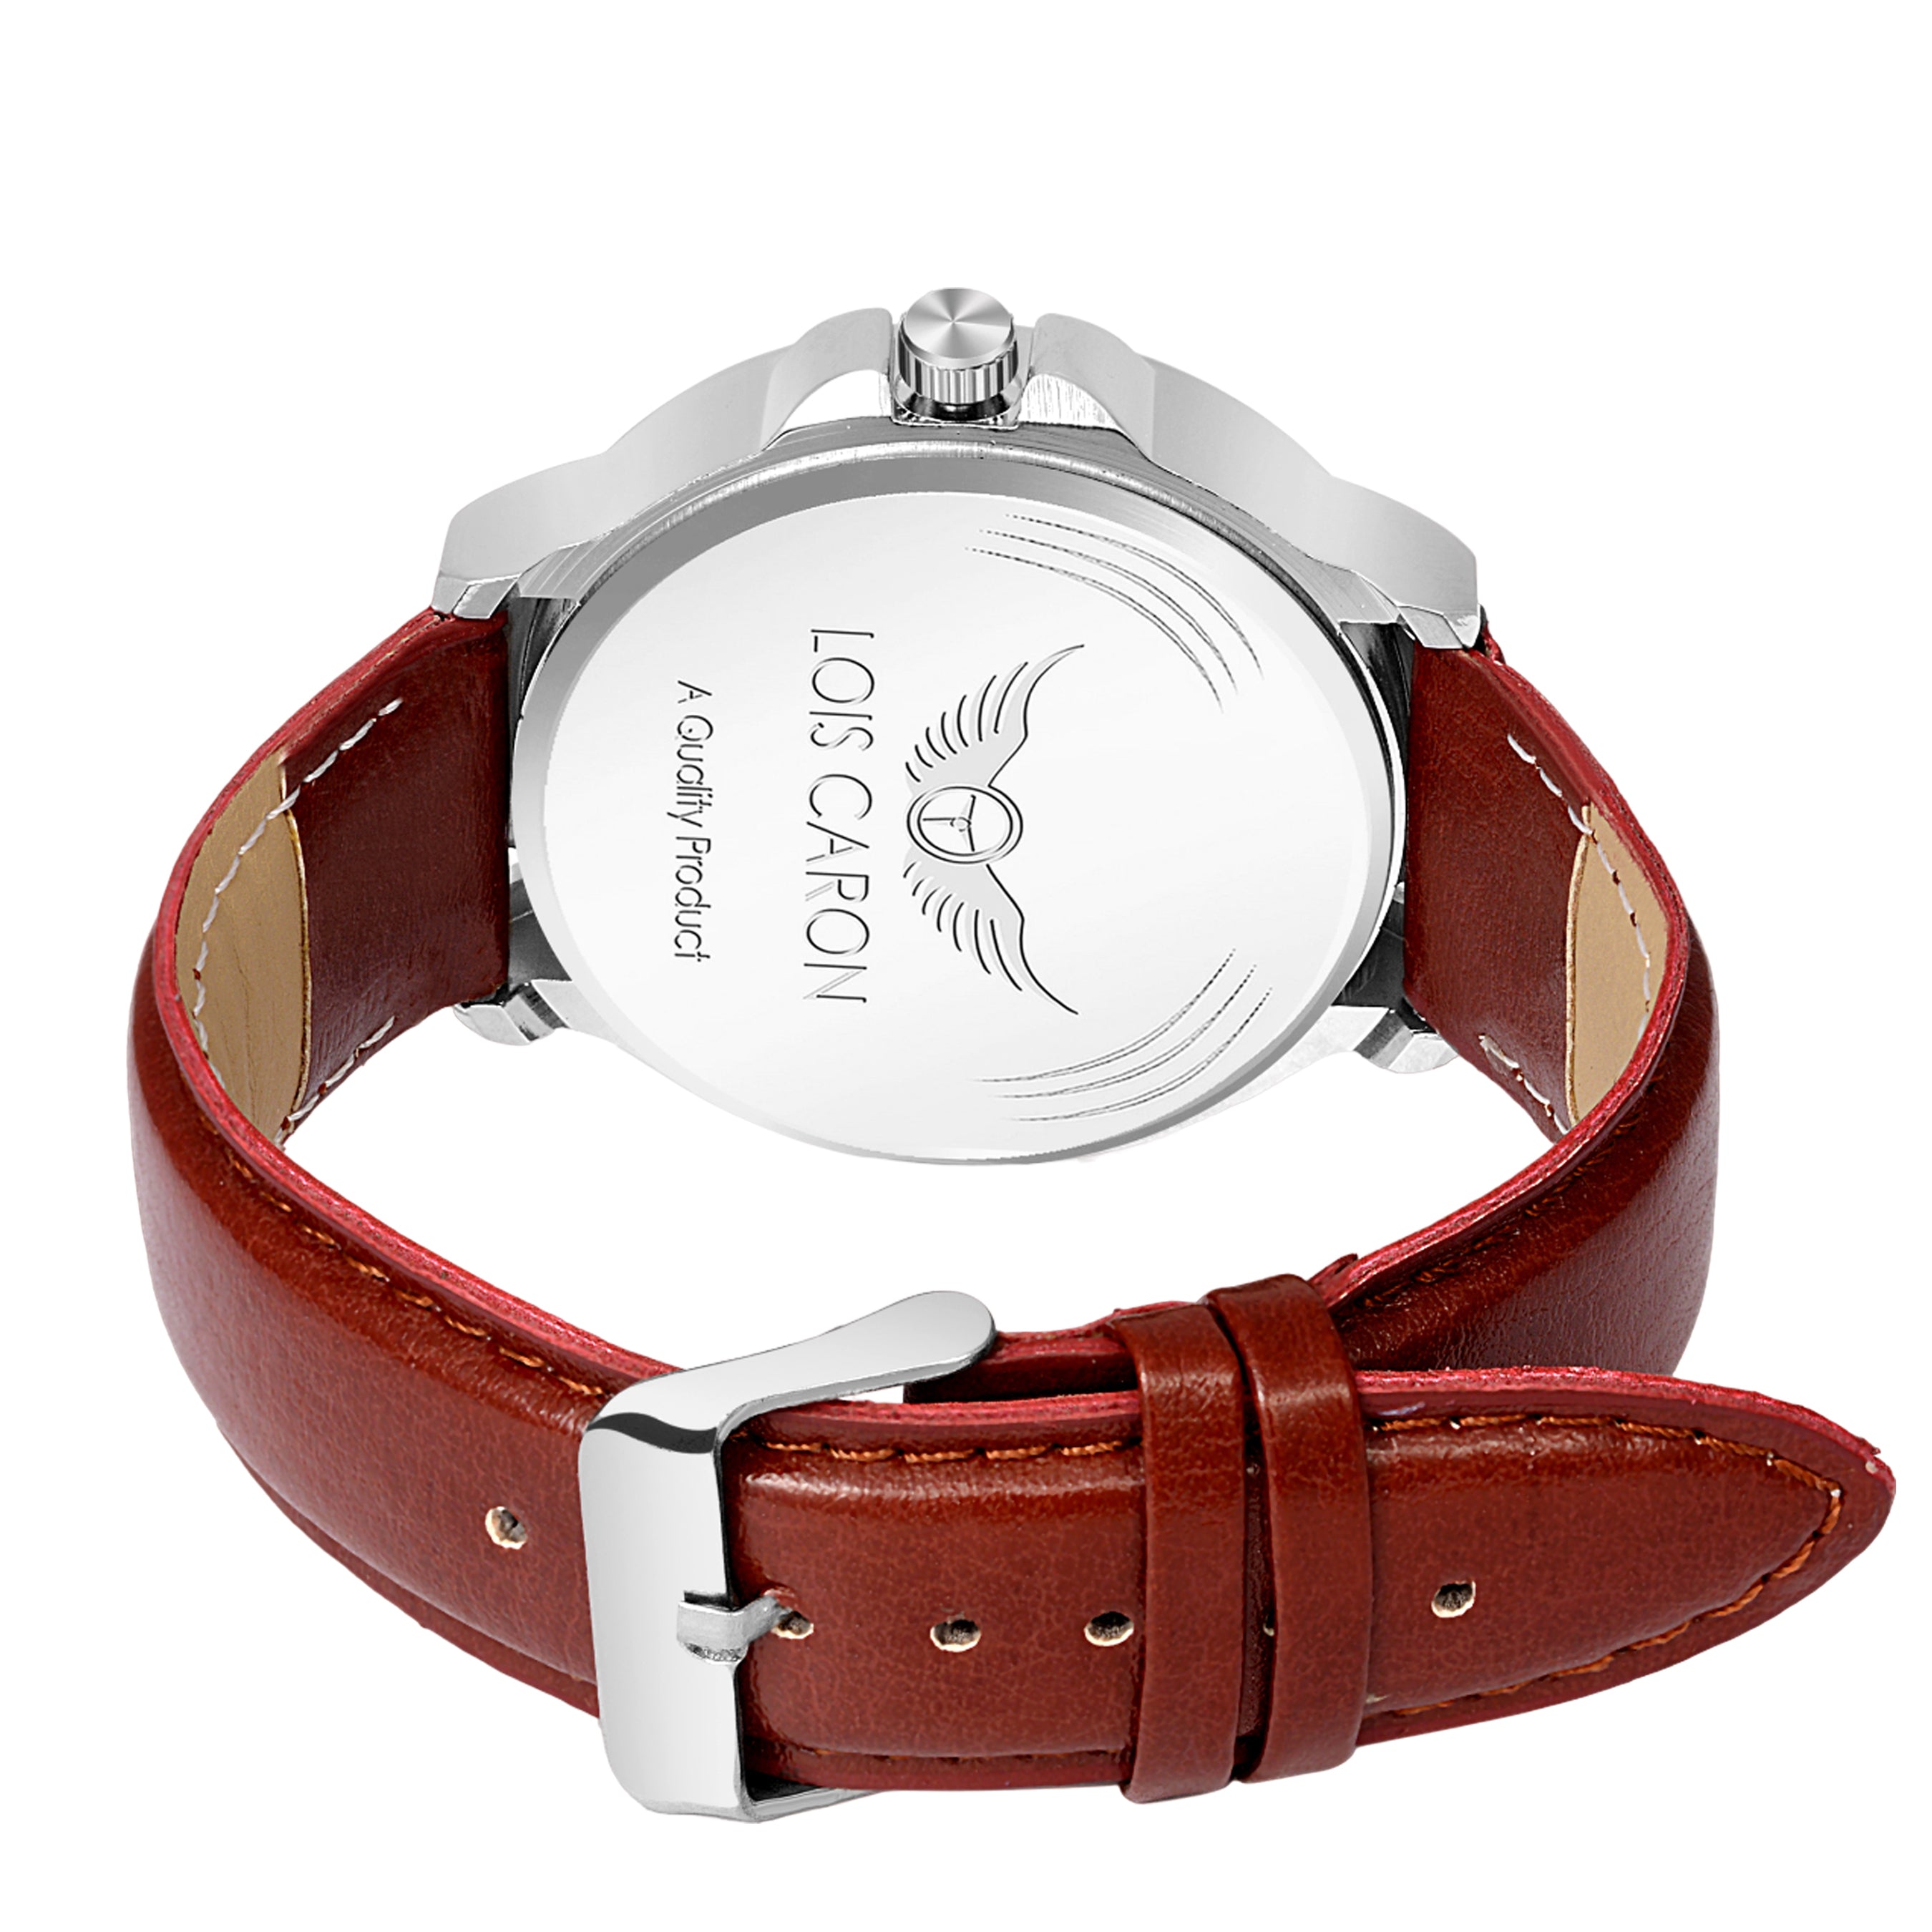 LOIS CARON White Dial & Brown Leather Strap for Boys Analog Watch - for Men(4248)